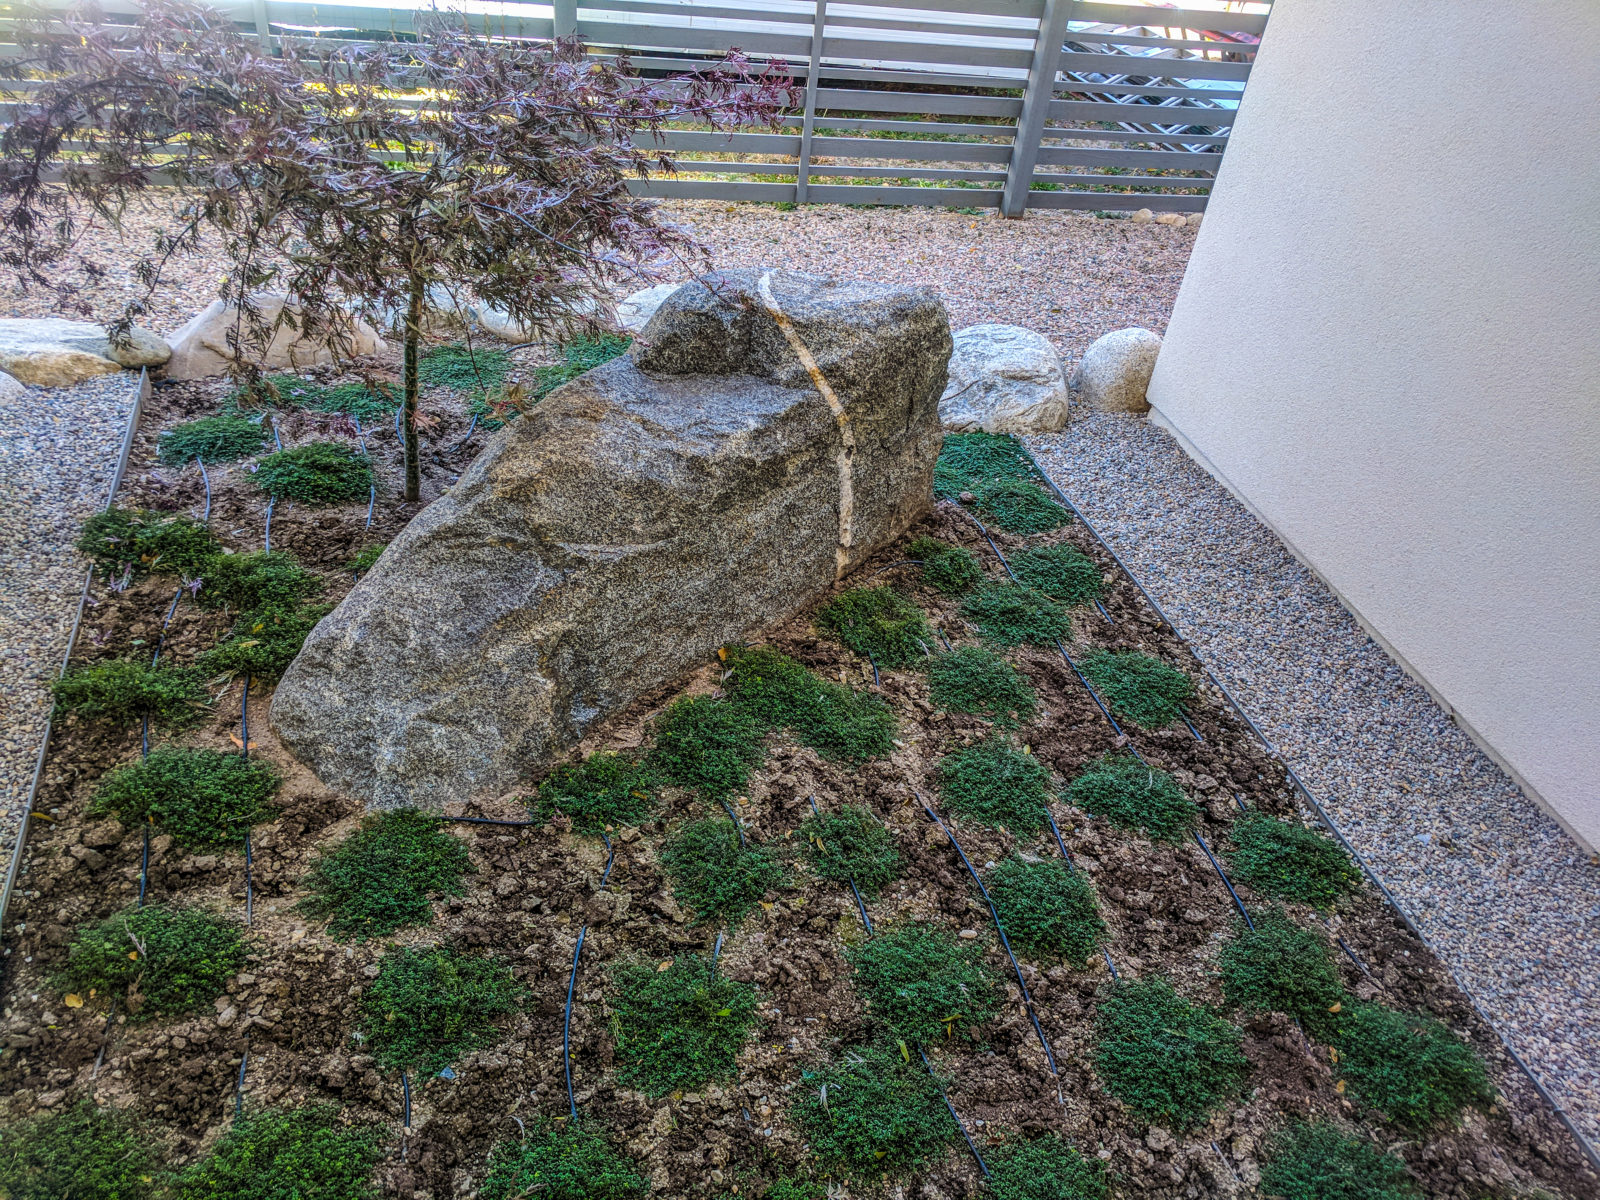 A Zen Garden design project at its completion